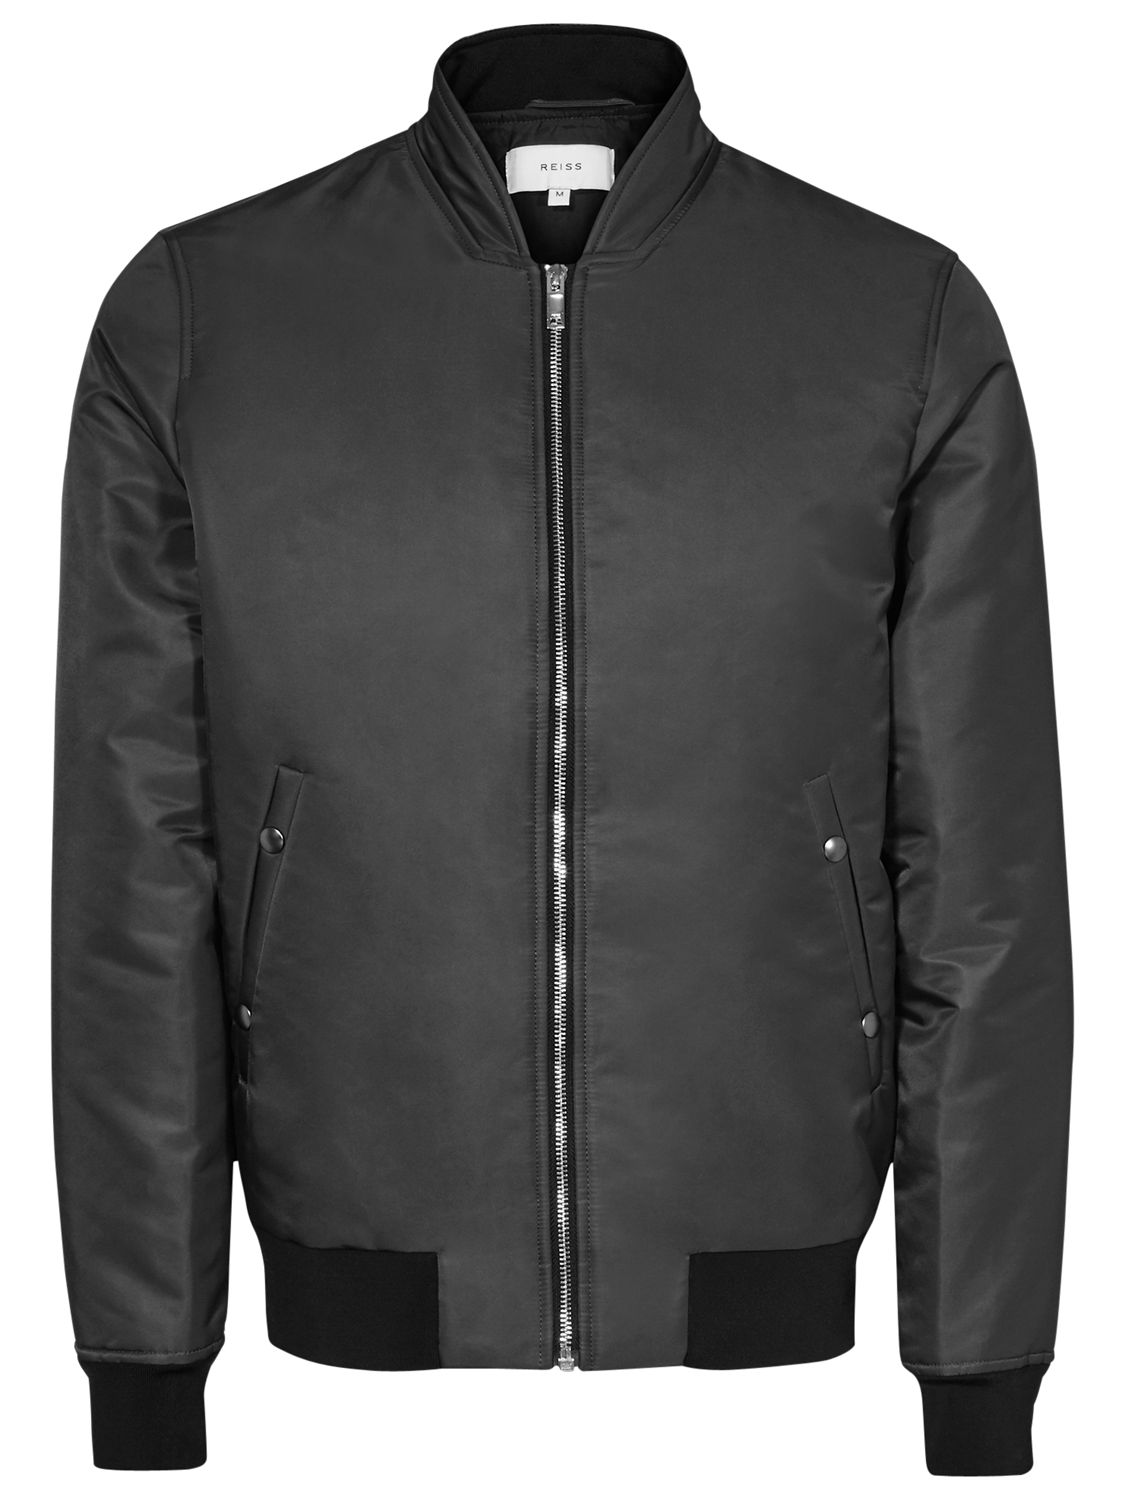 Men's Coats & Jackets | Quilted, Bomber & Leather Jackets | John Lewis